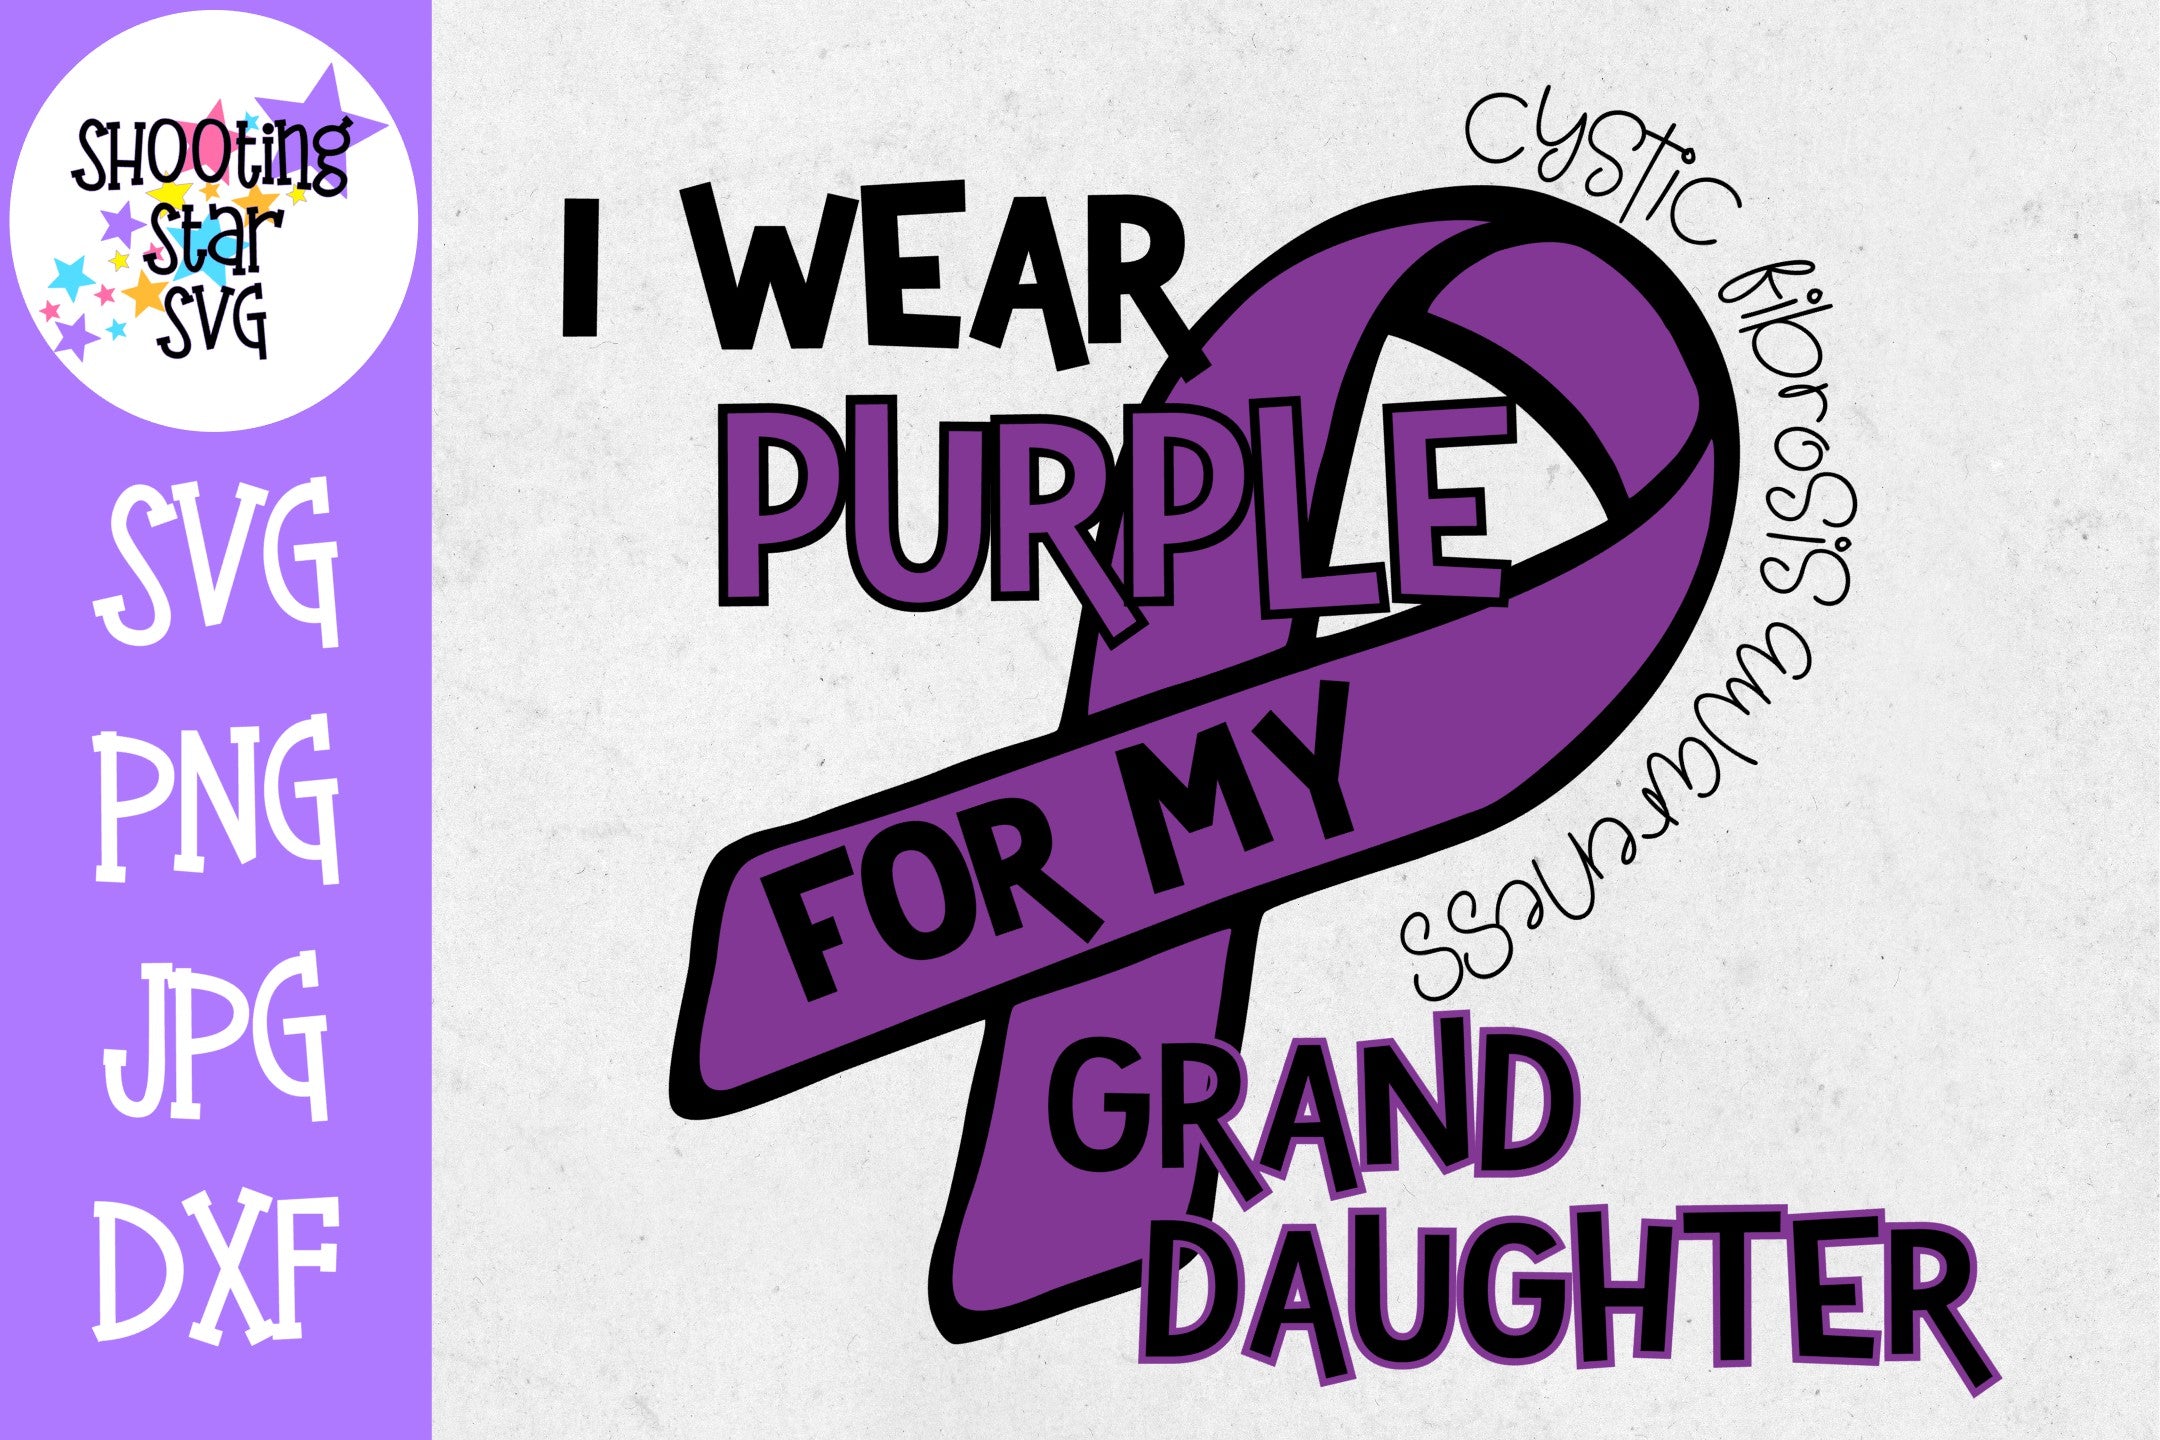 I Wear Purple for my Granddaughter - Cystic Fibrosis SVG